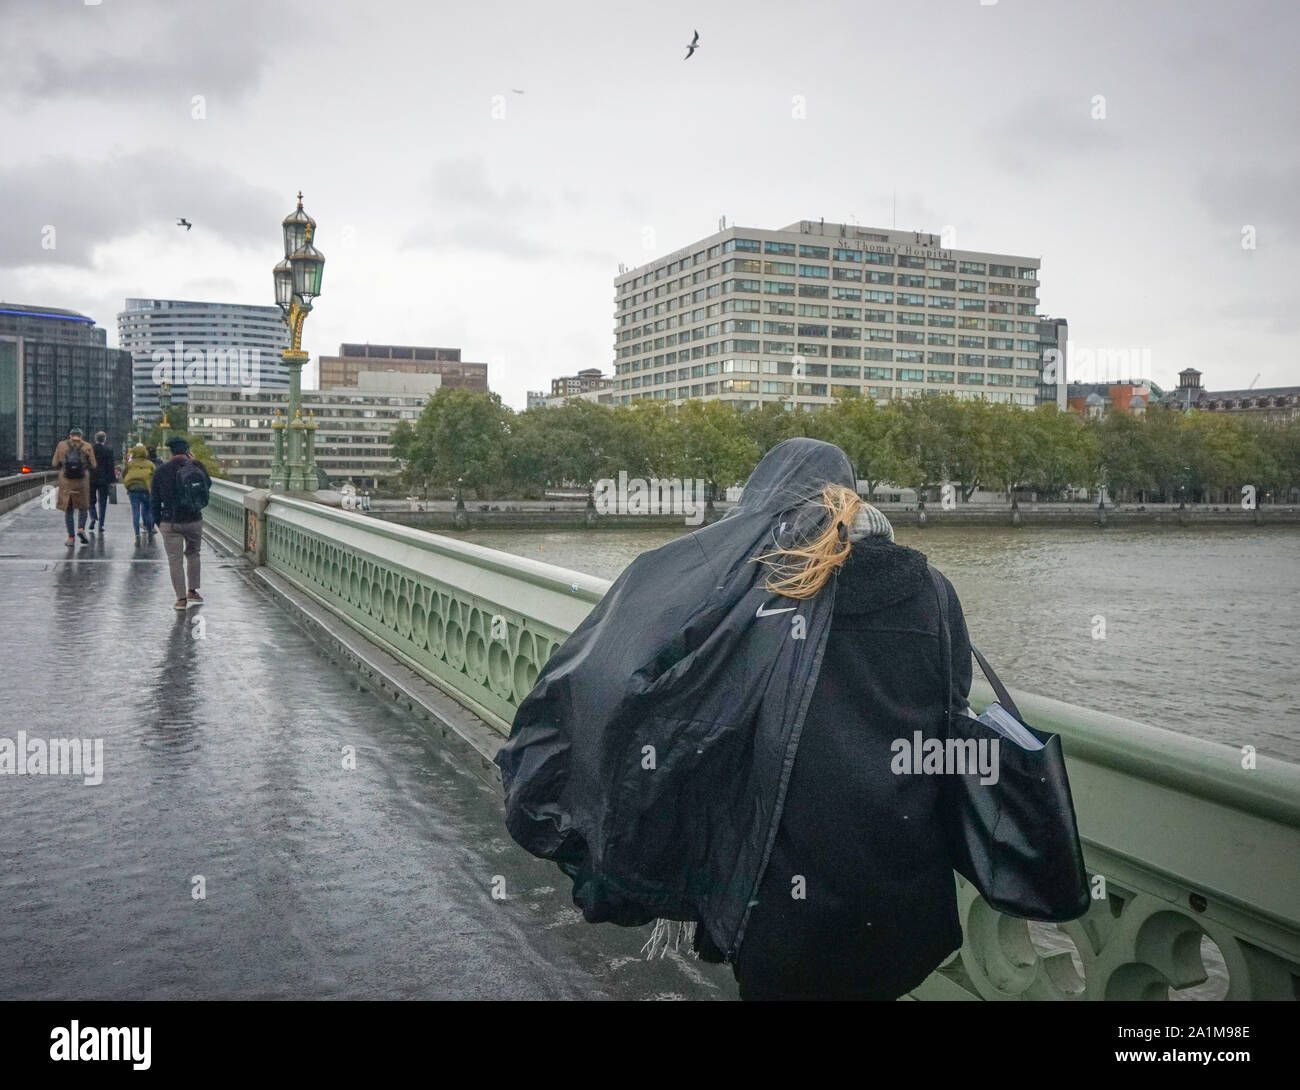 London, United Kingdom . 27th Sep, 2019. London, UK. 27 SEPTEMBER, UK WEATHER. Heavy rain broke out on Westminster Bridge this afternoon. Photo by (Ioannis Alexopolos/Alamy Live News). Stock Photo